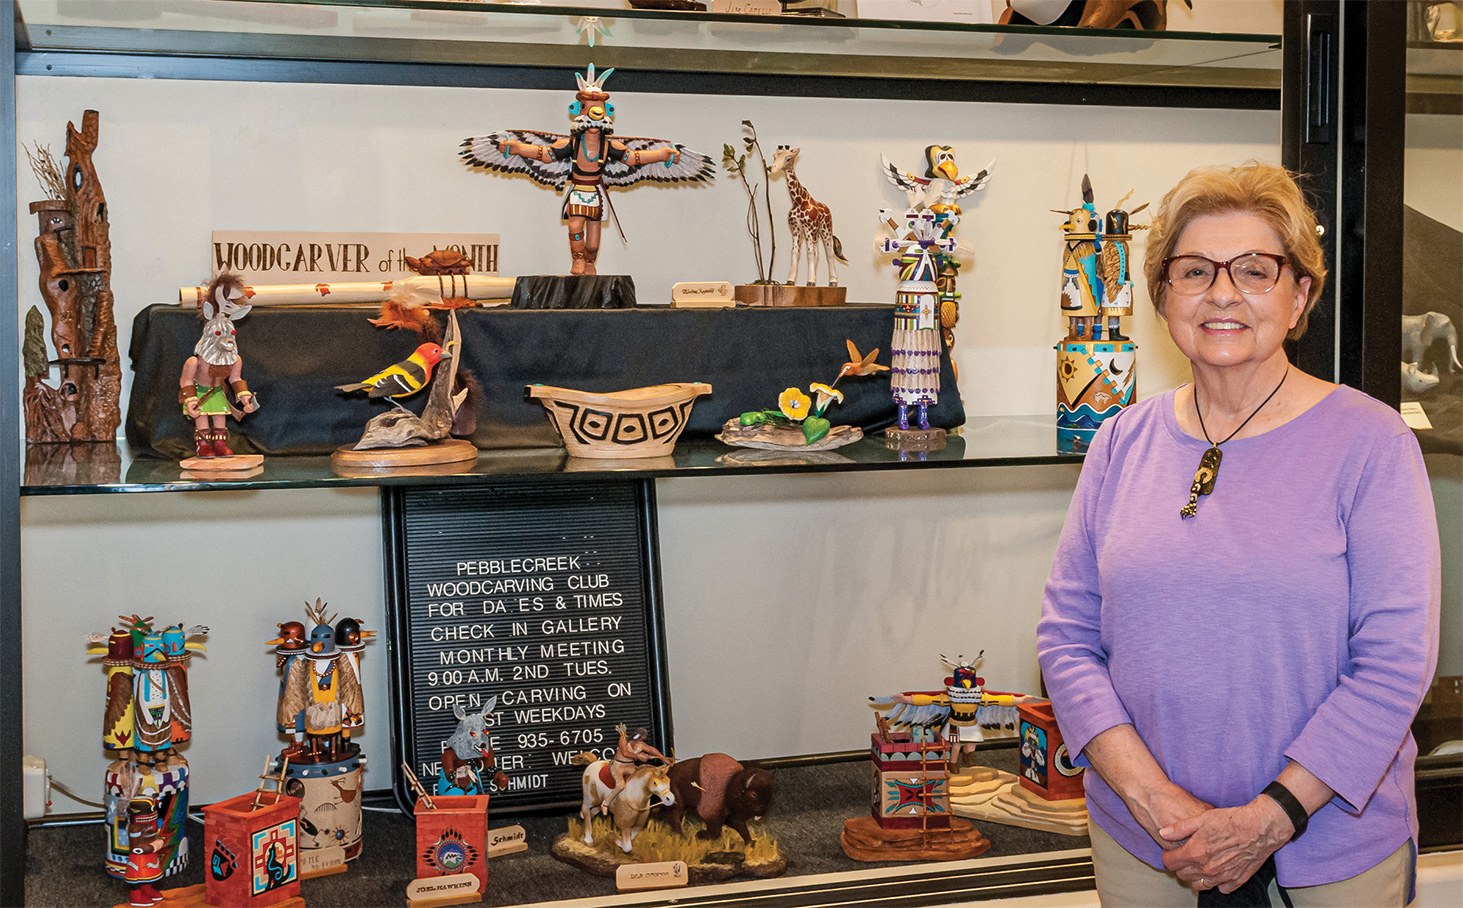 Elaine with several of her carvings on the middle shelf of the carving club's display window in the Creative Arts Center.